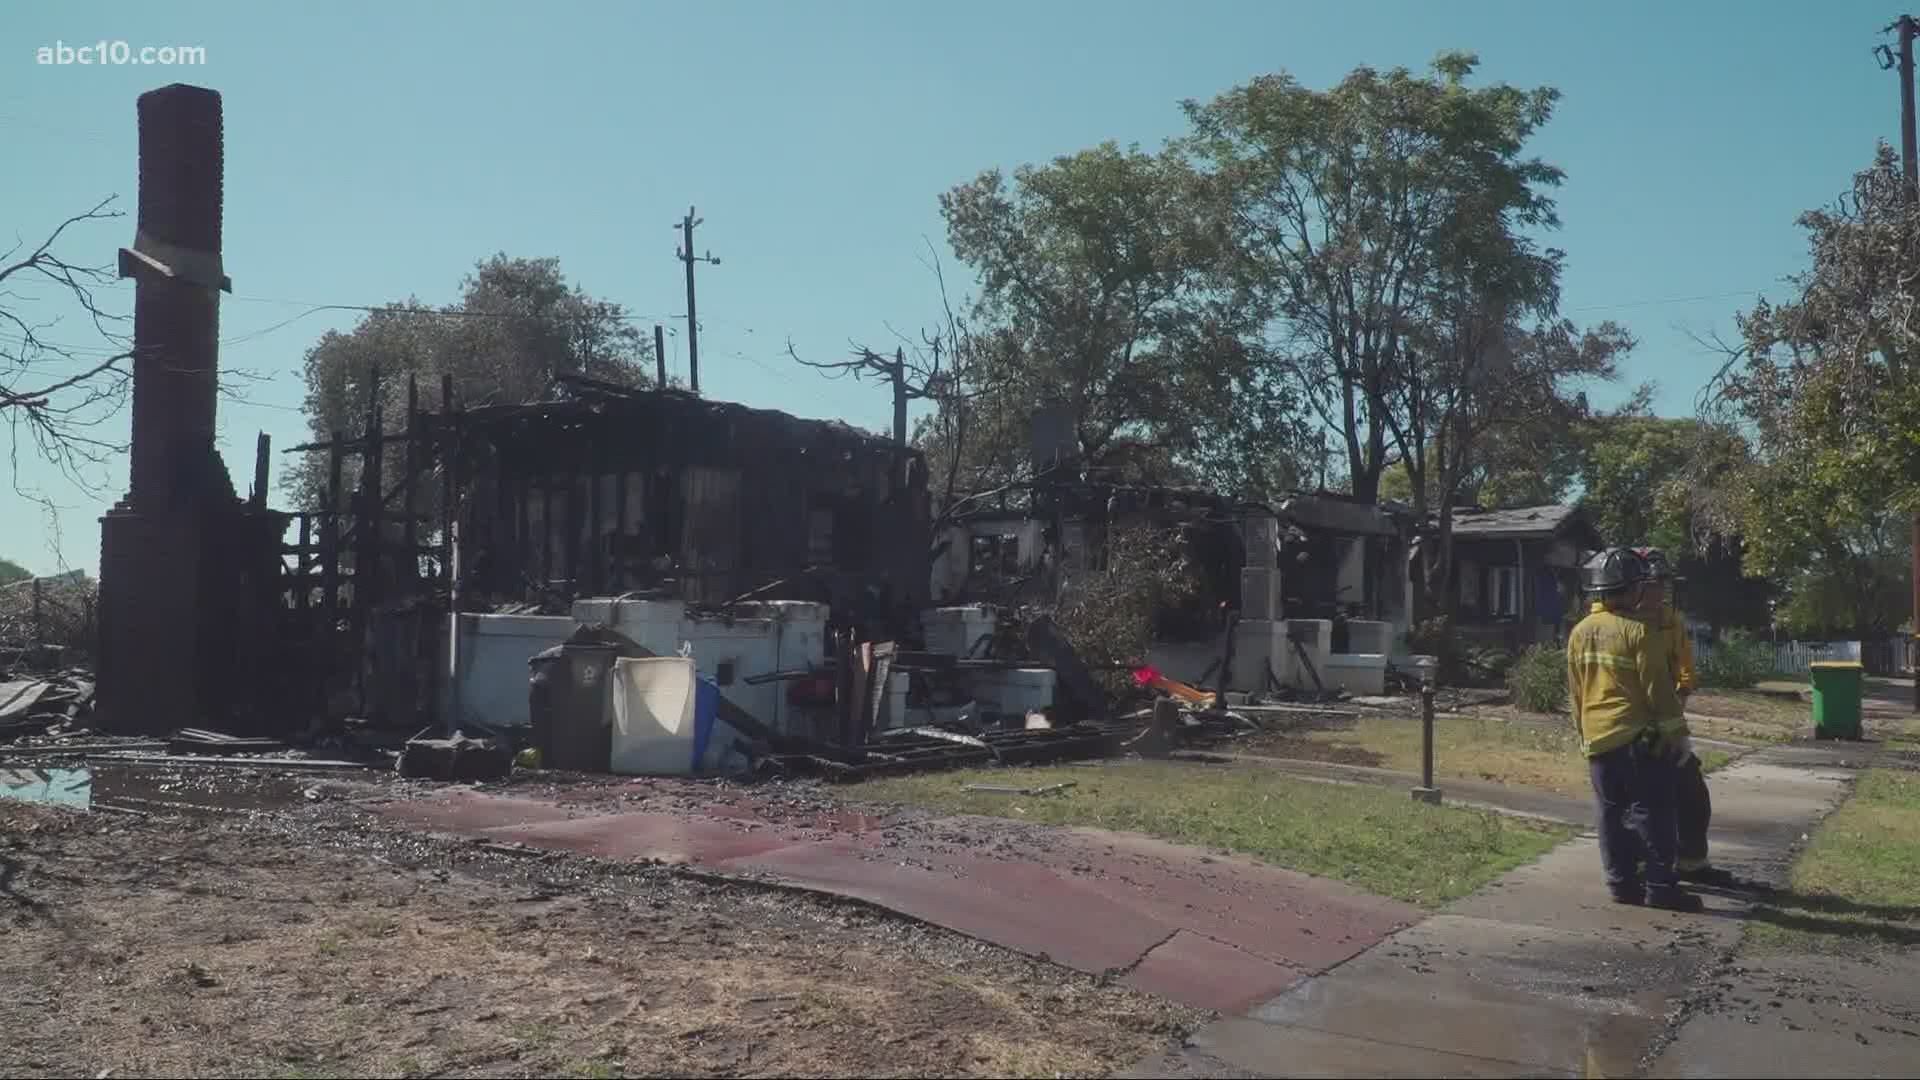 Fires in Stockton and Tracy destroyed homes forcing families to find another place to stay.